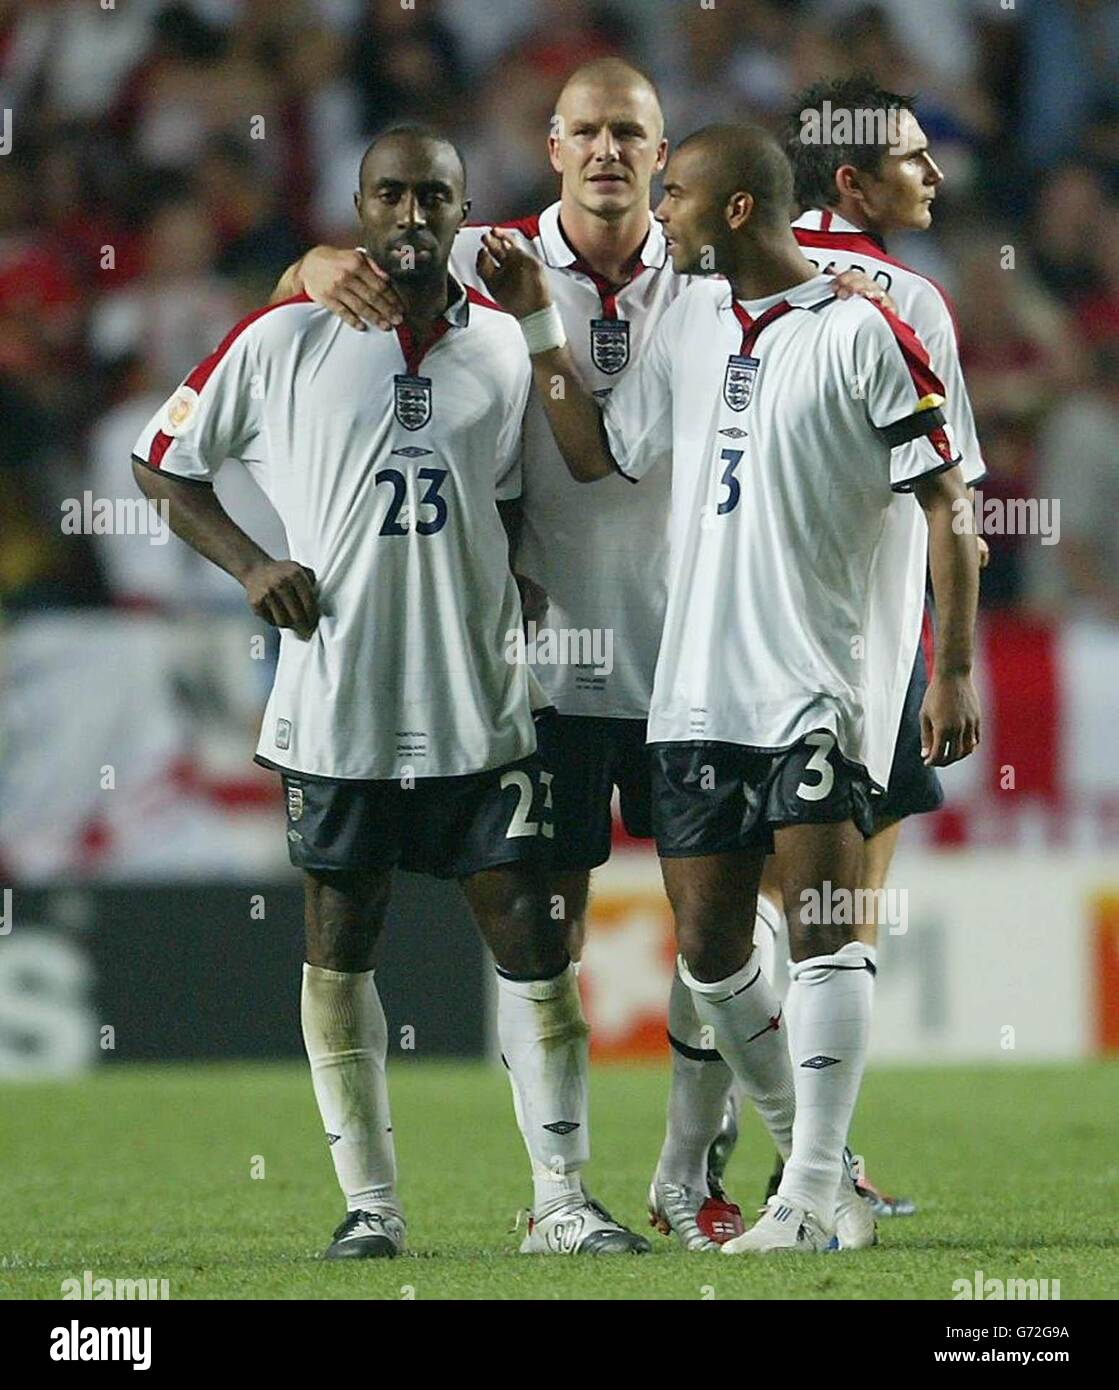 England's Darius Vassell (L) is consoled by team-mates David Beckham and Ashley Cole (R) after missing a penalty against Portugal during the Euro 2004 quarter-final match at the Estadio da Luz, Lisbon, Portugal. England lost to Portugal 6-5 on penalties after the match ended in a 2-2 draw following extra-time. EDITORIAL USE ONLY, NO MOBILE PHONE OR PDA USE. INTERNET USE ONLY ON UEFA AUTHORISED SITES AND THEN, NO MORE THAN 10 PHOTOGRAPHS PER HALF OF NORMAL PLAYING TIME AND FIVE PHOTOGRAPHS PER HALF OF EXTRA TIME CAN BE PUBLISHED VIA THE INTERNET WITH AN INTERVAL OF AT LEAST ONE MINUTE BETWEEN Stock Photo